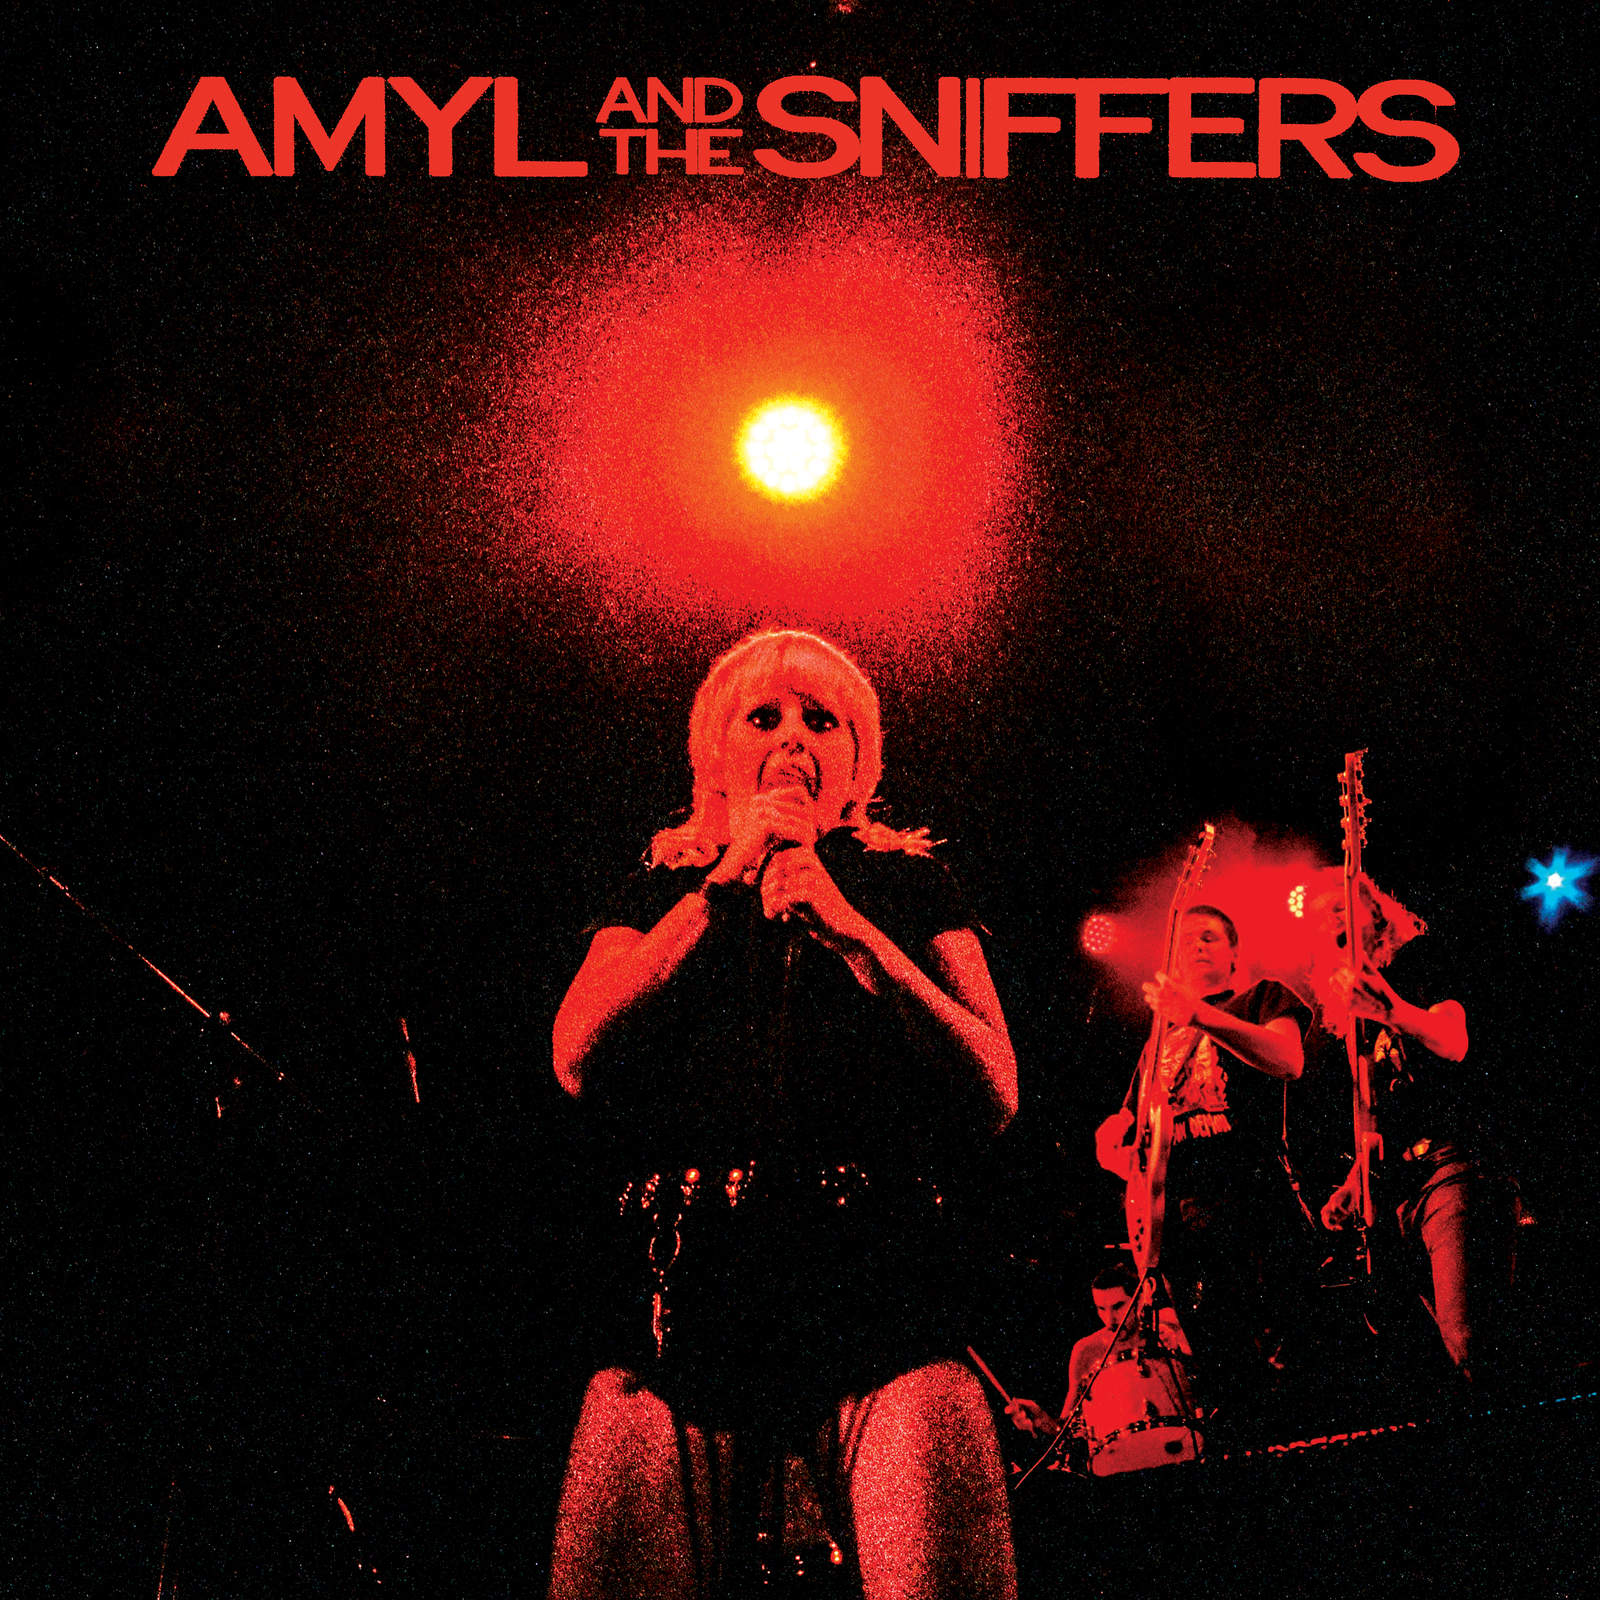 AMYL AND THE SNIFFERS - BIG ATTRACTION & GIDDY UP - VINYL LP - Wah Wah Records